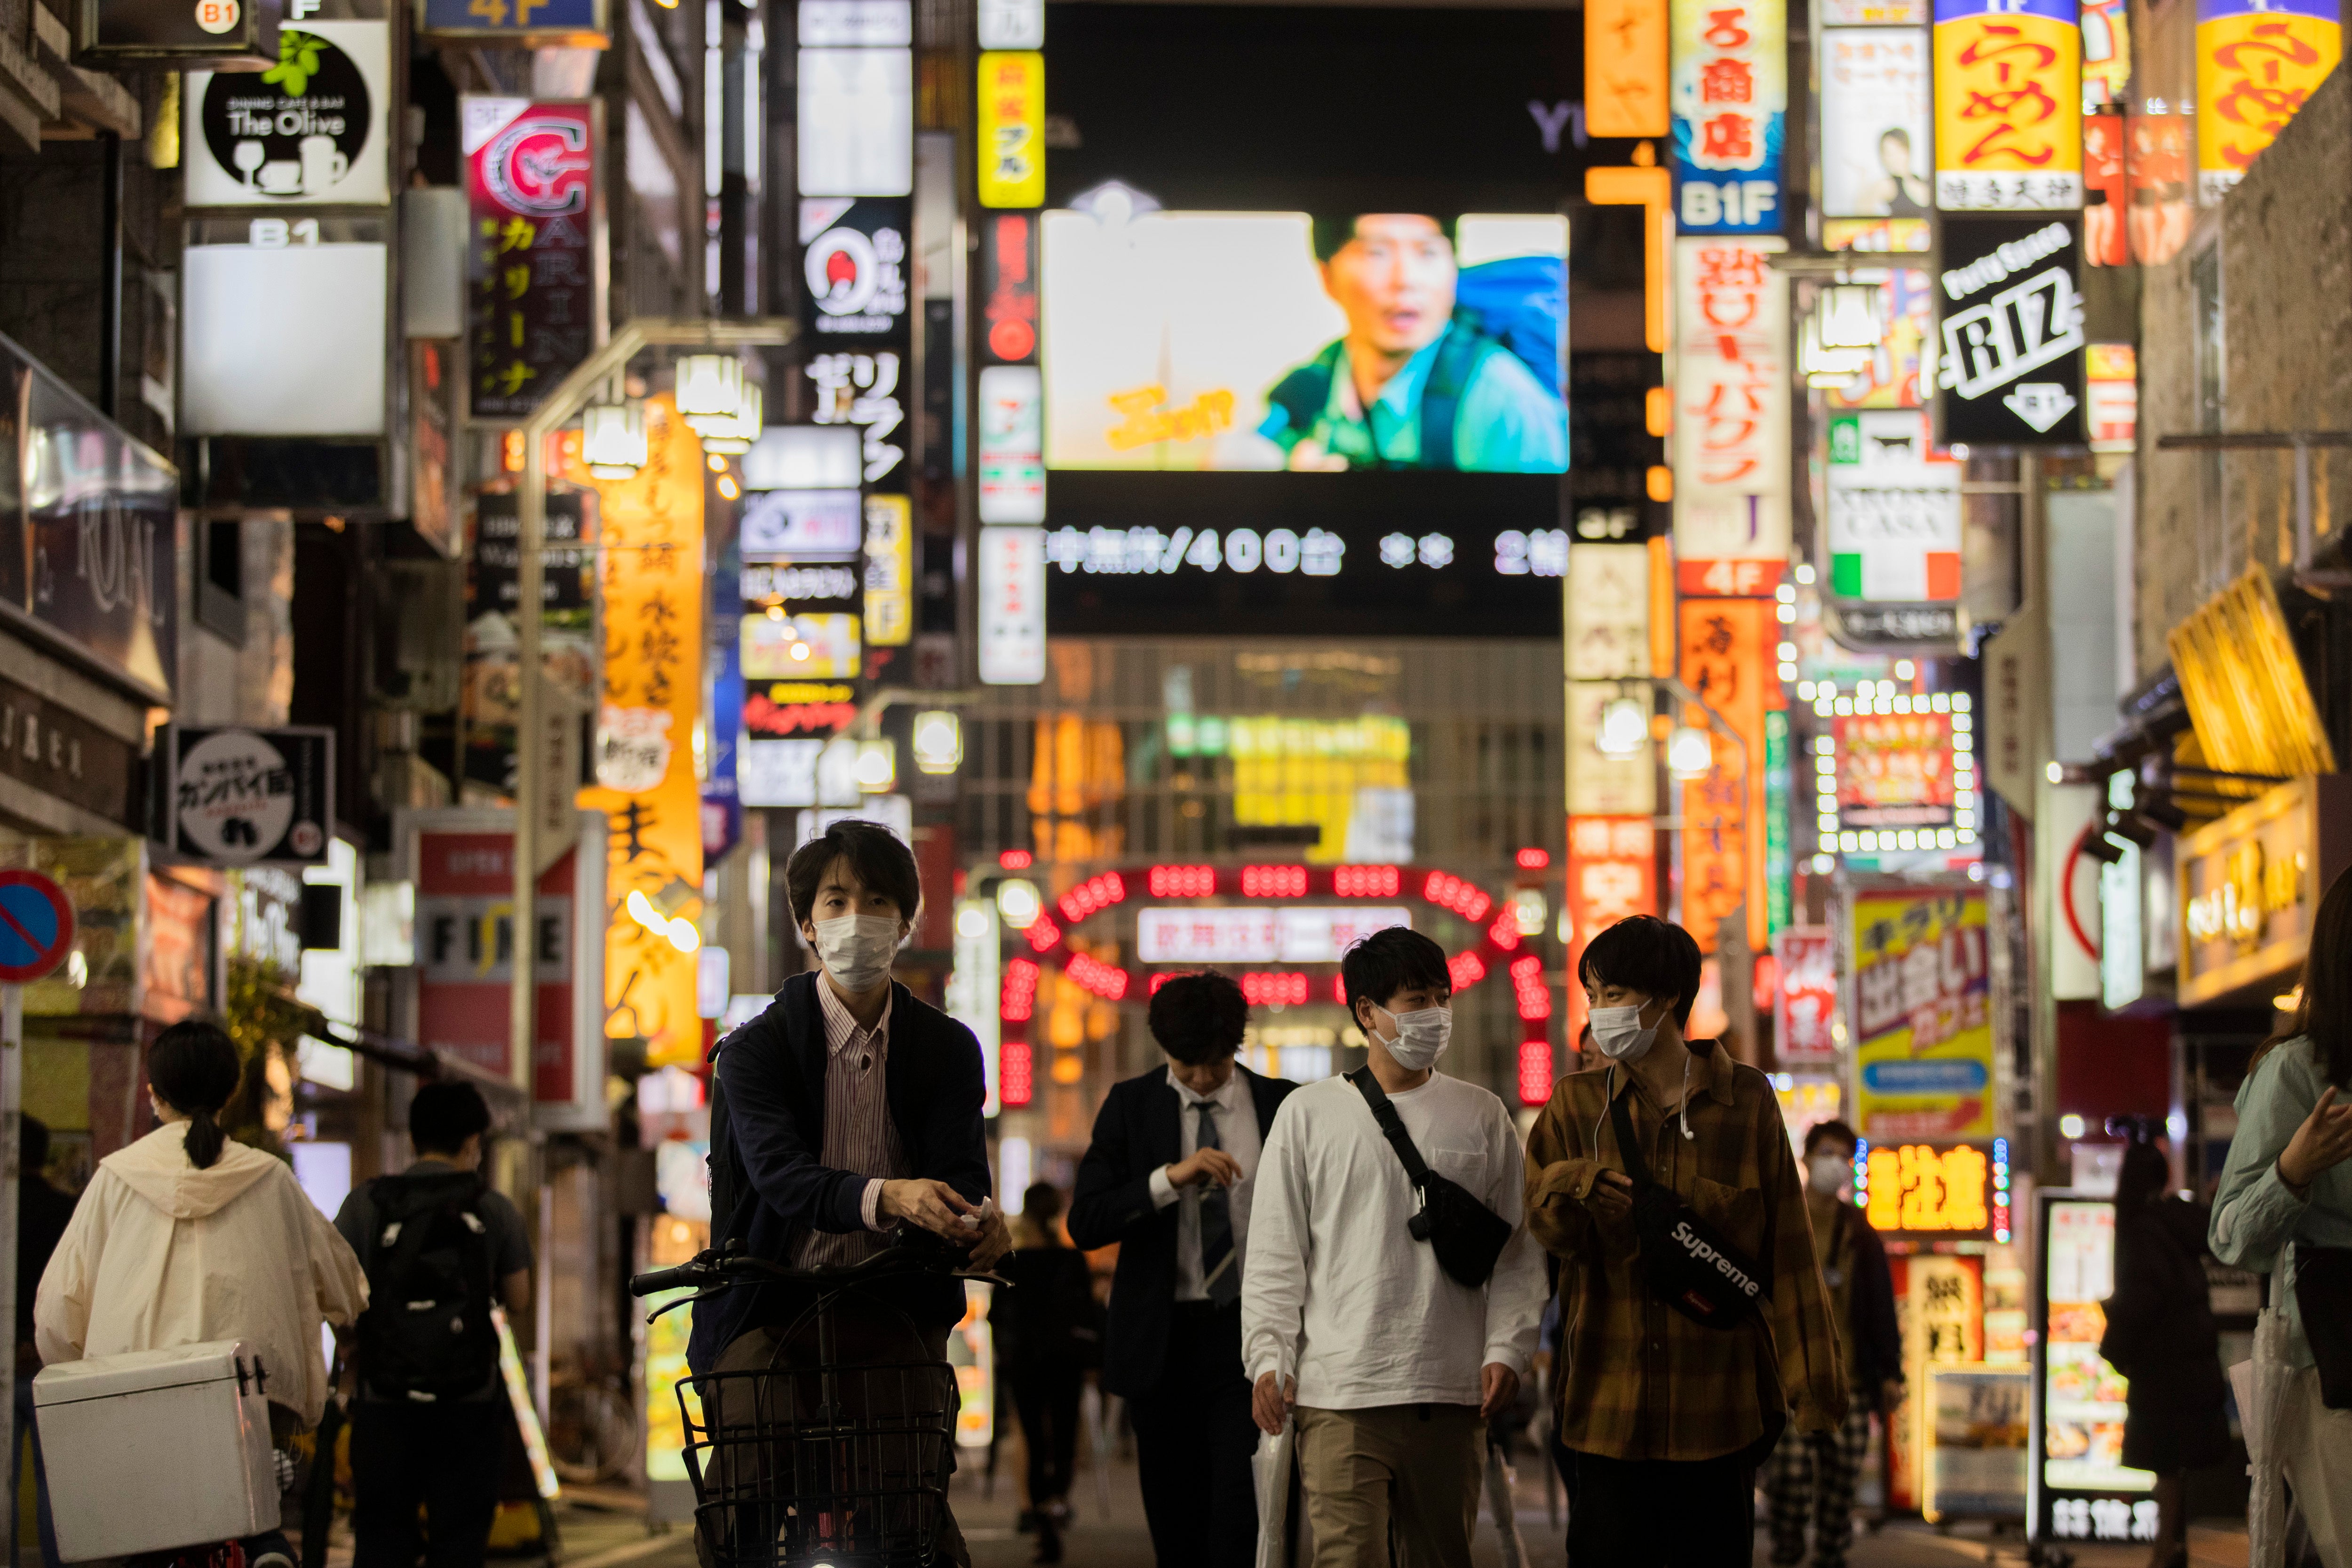 File photo: People walk through the famed Kabukicho entertainment district of Tokyo